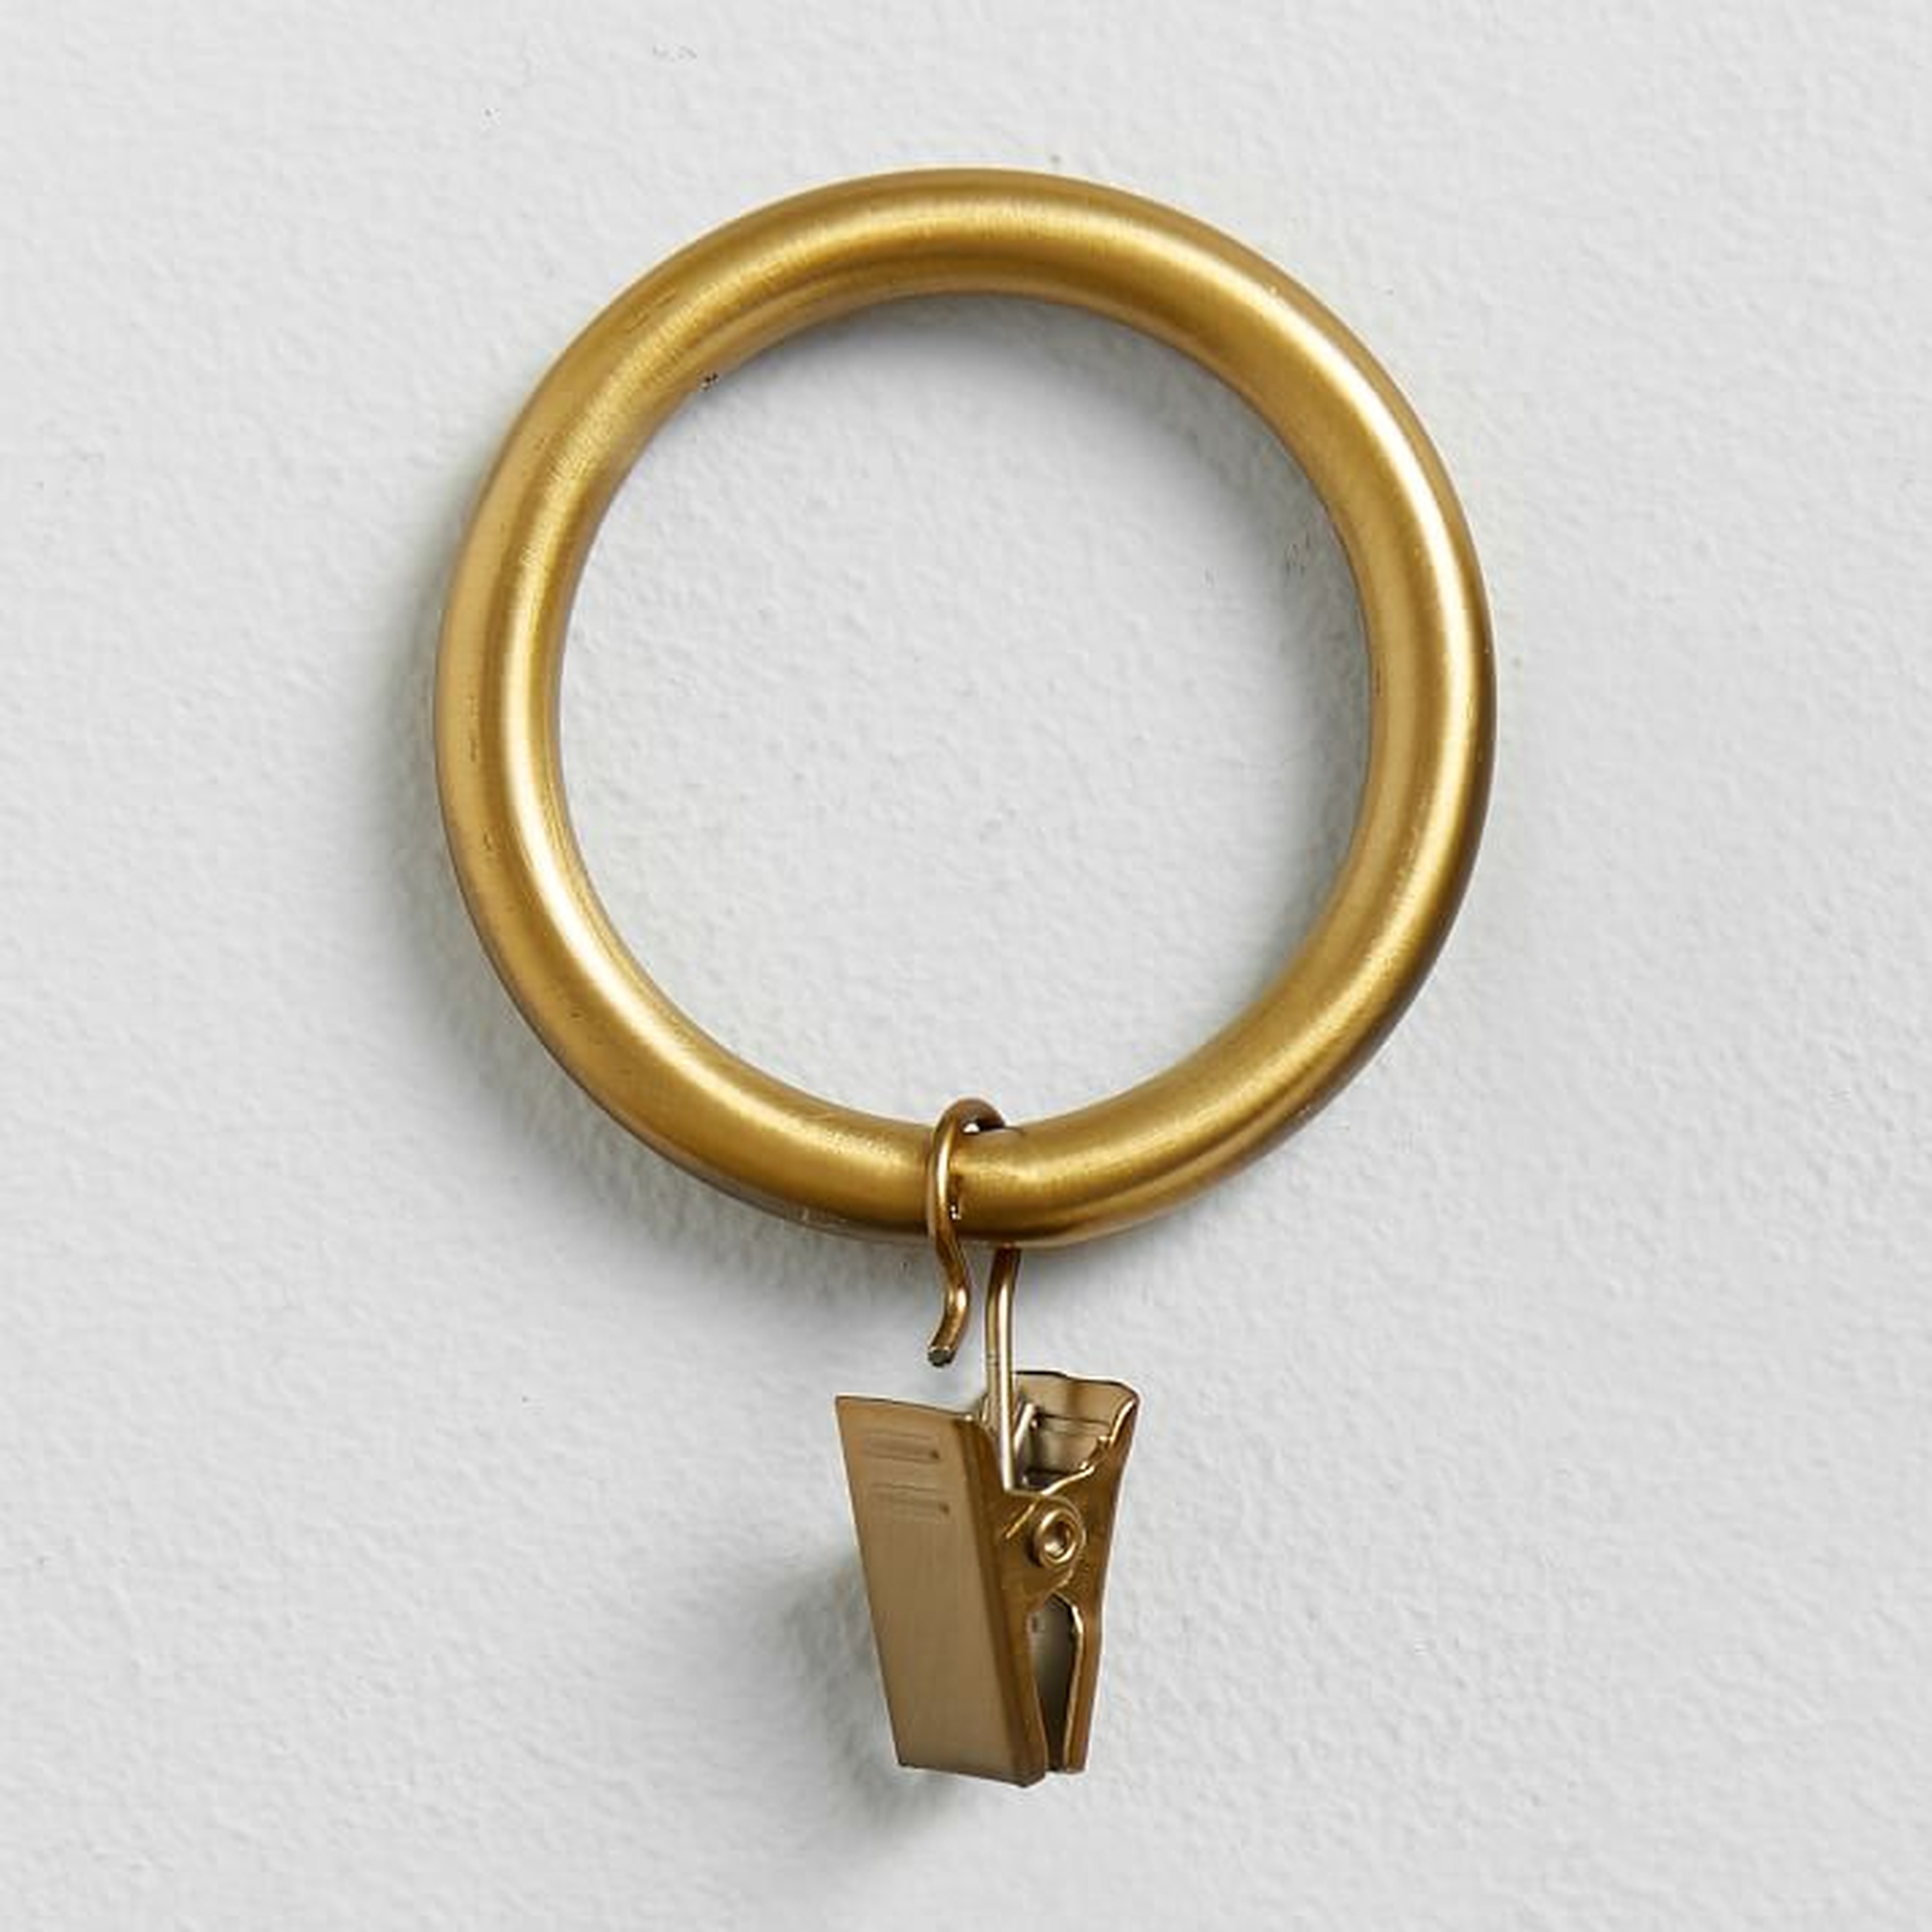 Classic Steel Curtain Rings with Clips, .75", Brass - Pottery Barn Teen